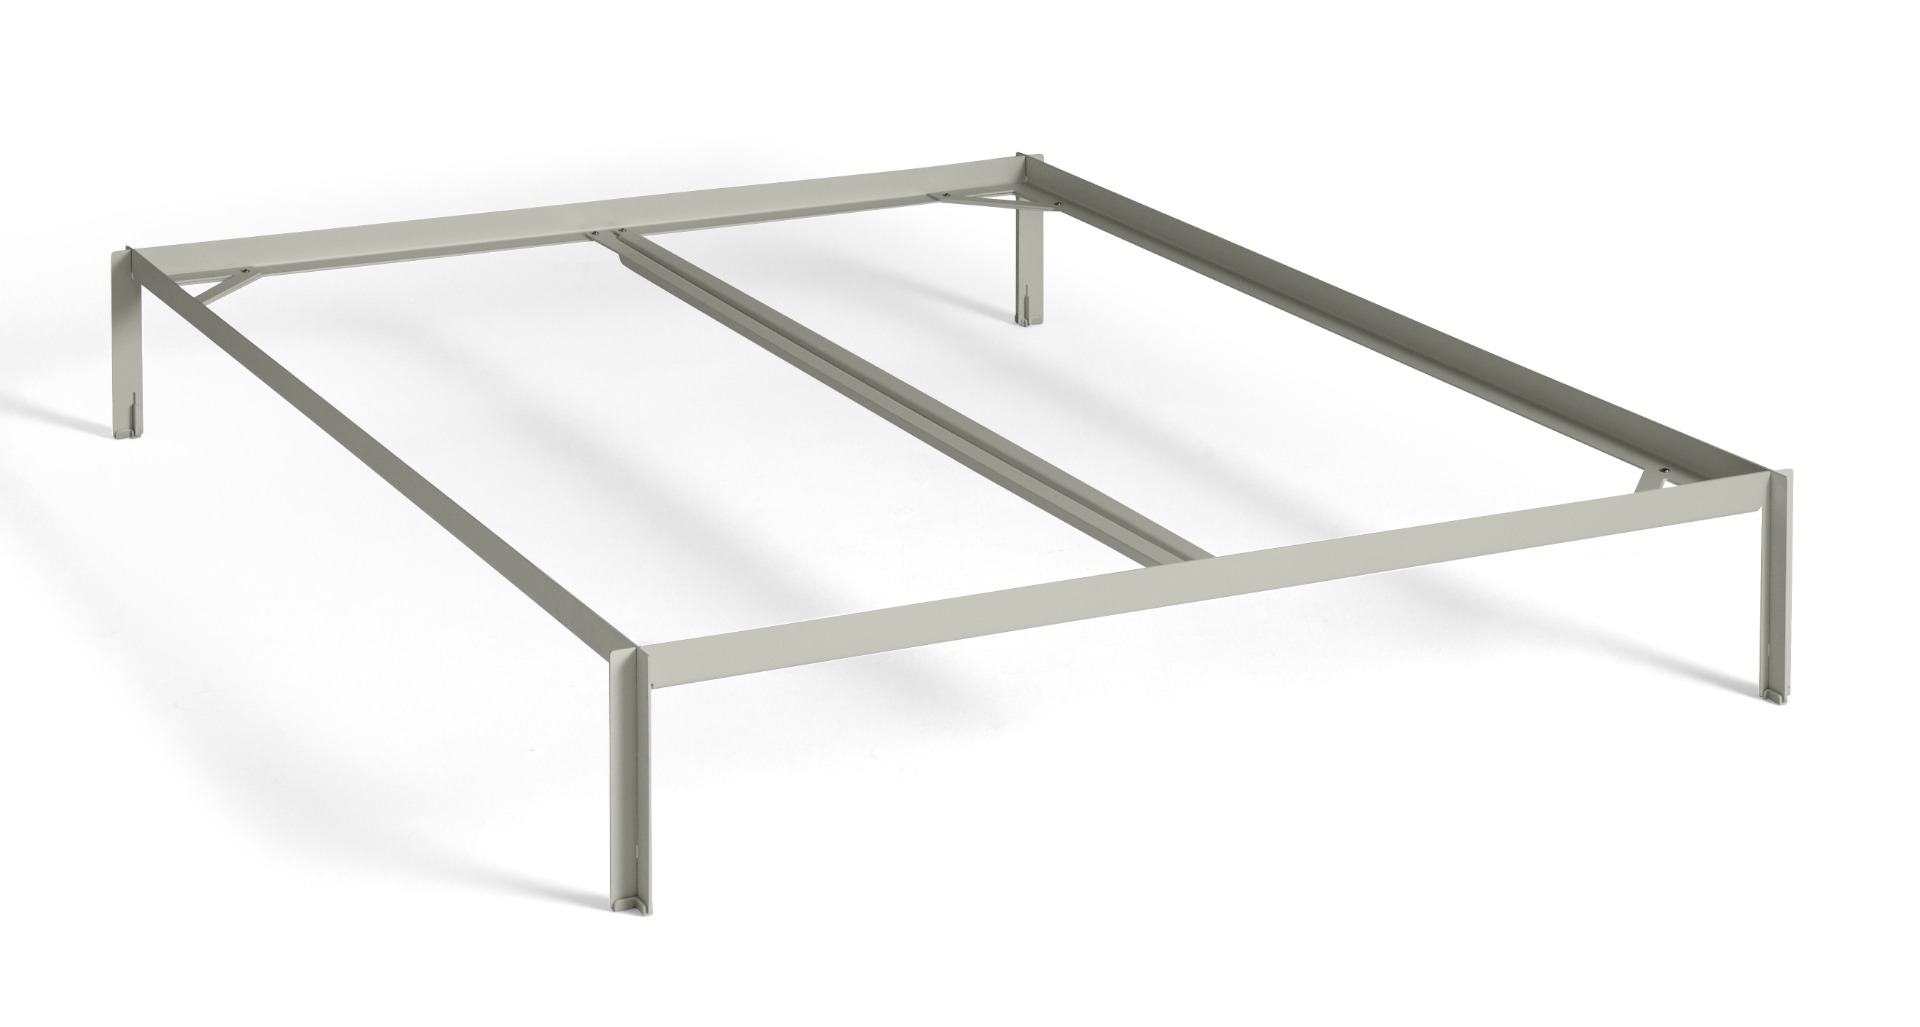 https://www.fundesign.nl/media/catalog/product/a/b/ab073-a666-aa81_connect_bed_warm_grey_160x200.jpg